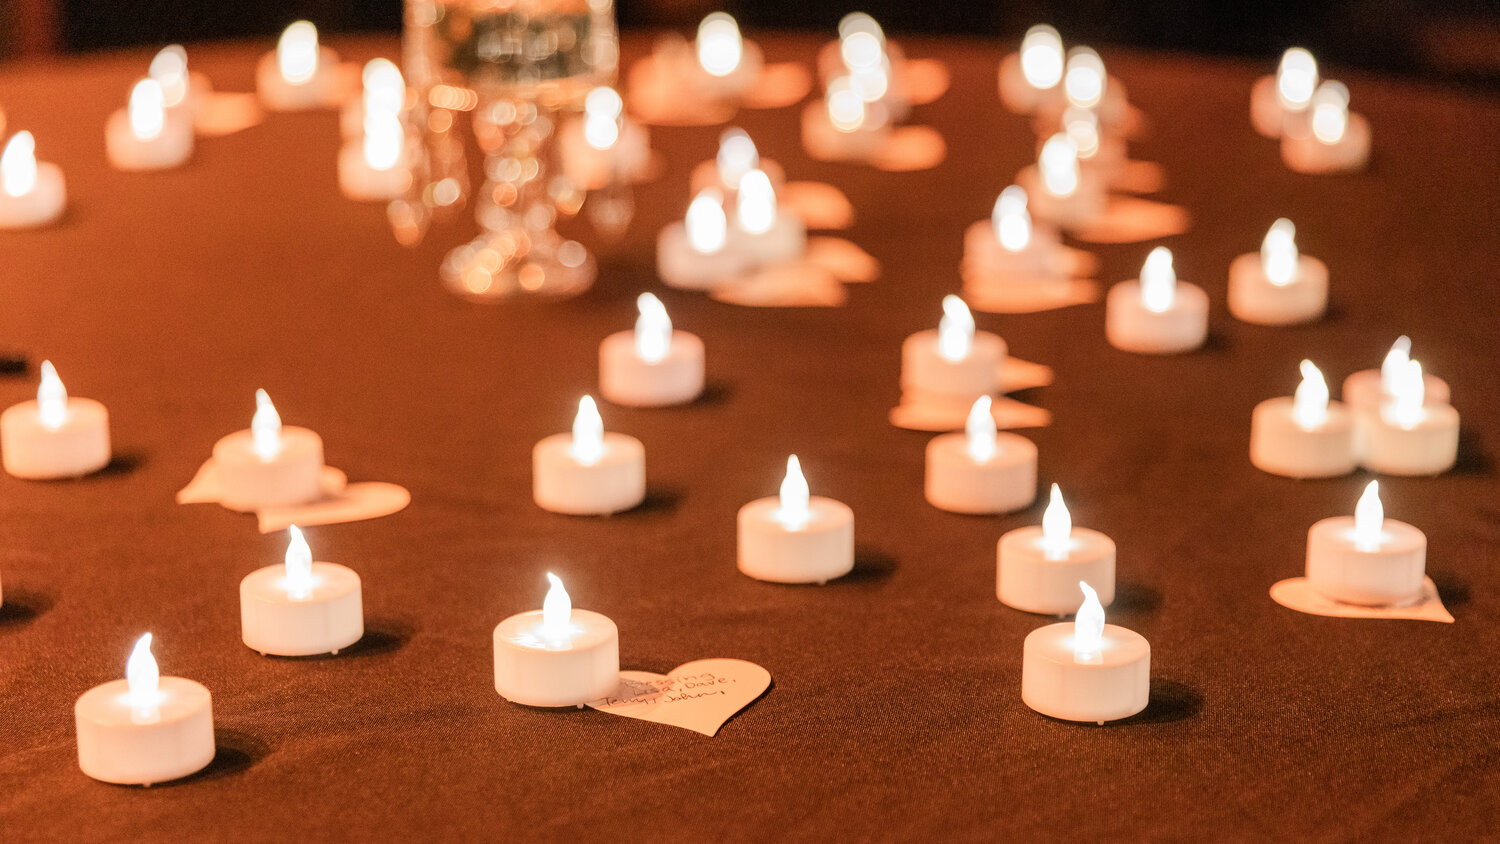 Tea lights are illuminated over heart-shaped notes during a showing of “Love in the Time of Fentanyl” at McFiler’s Chehalis Theater on Monday, Sept. 18.